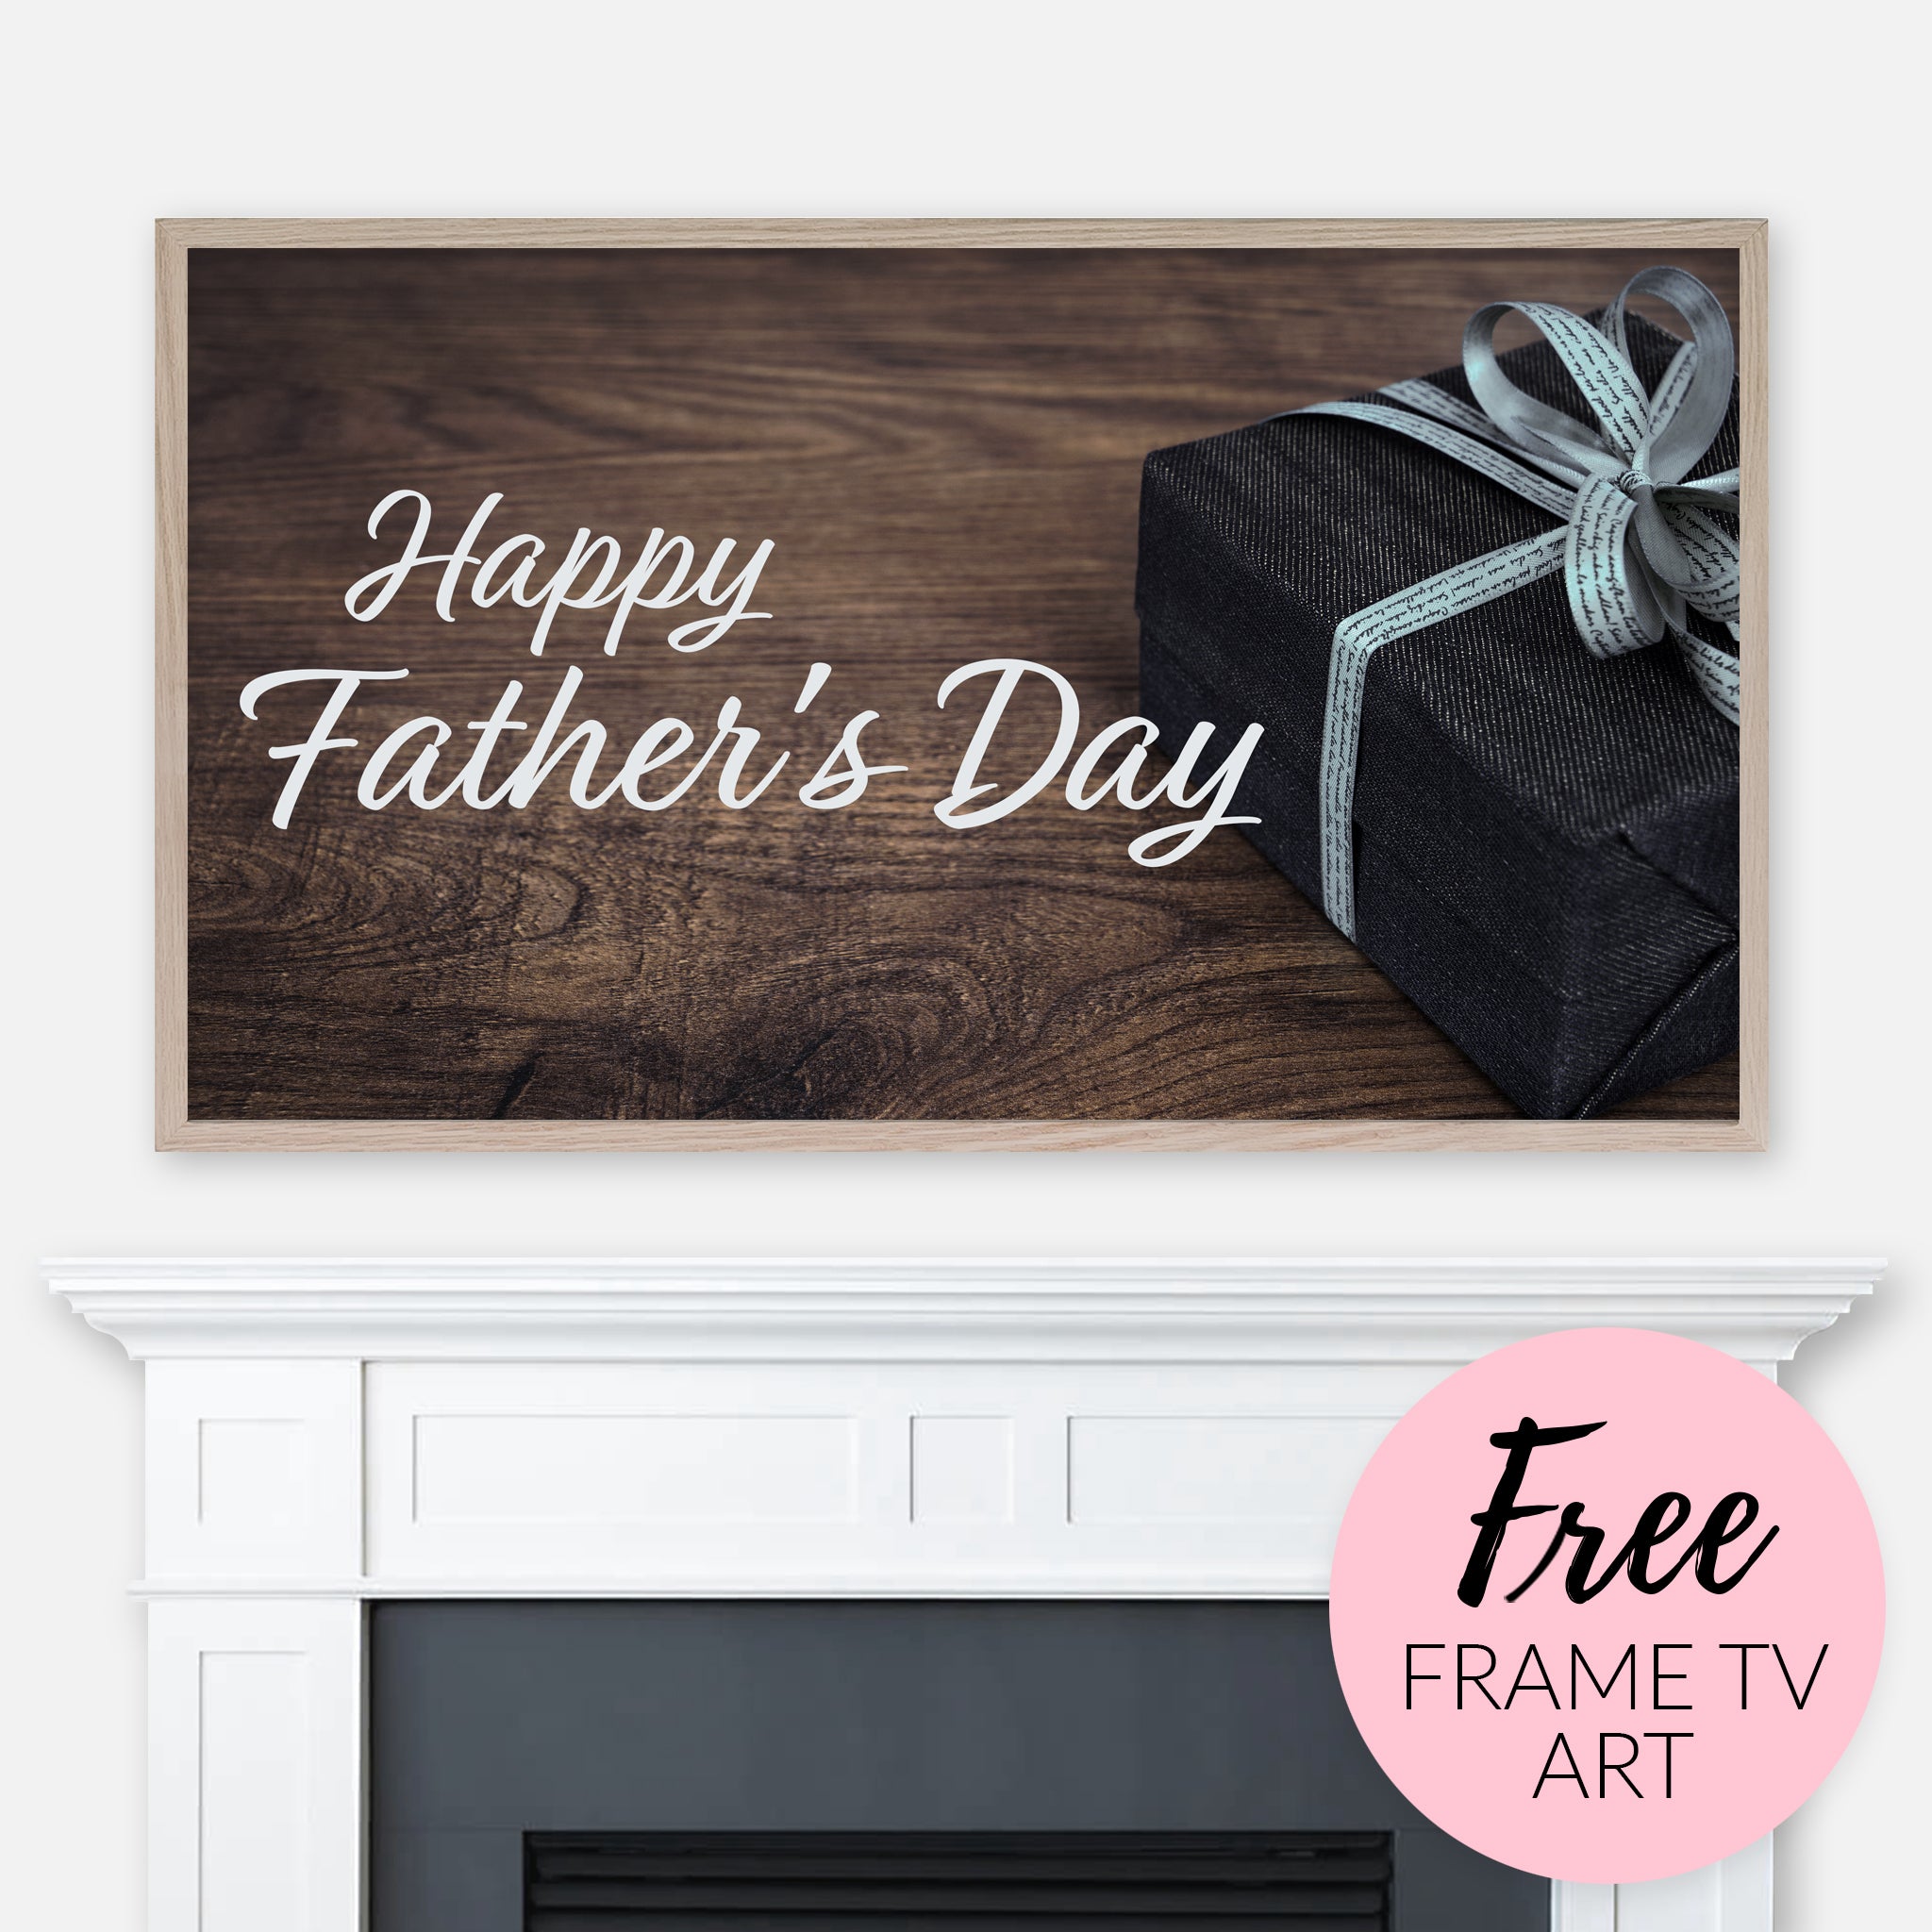 Free Father’s Day Samsung Frame TV Art Digital Download - Gift Box With Ribbon on Wooden Table - Rustic Neutral